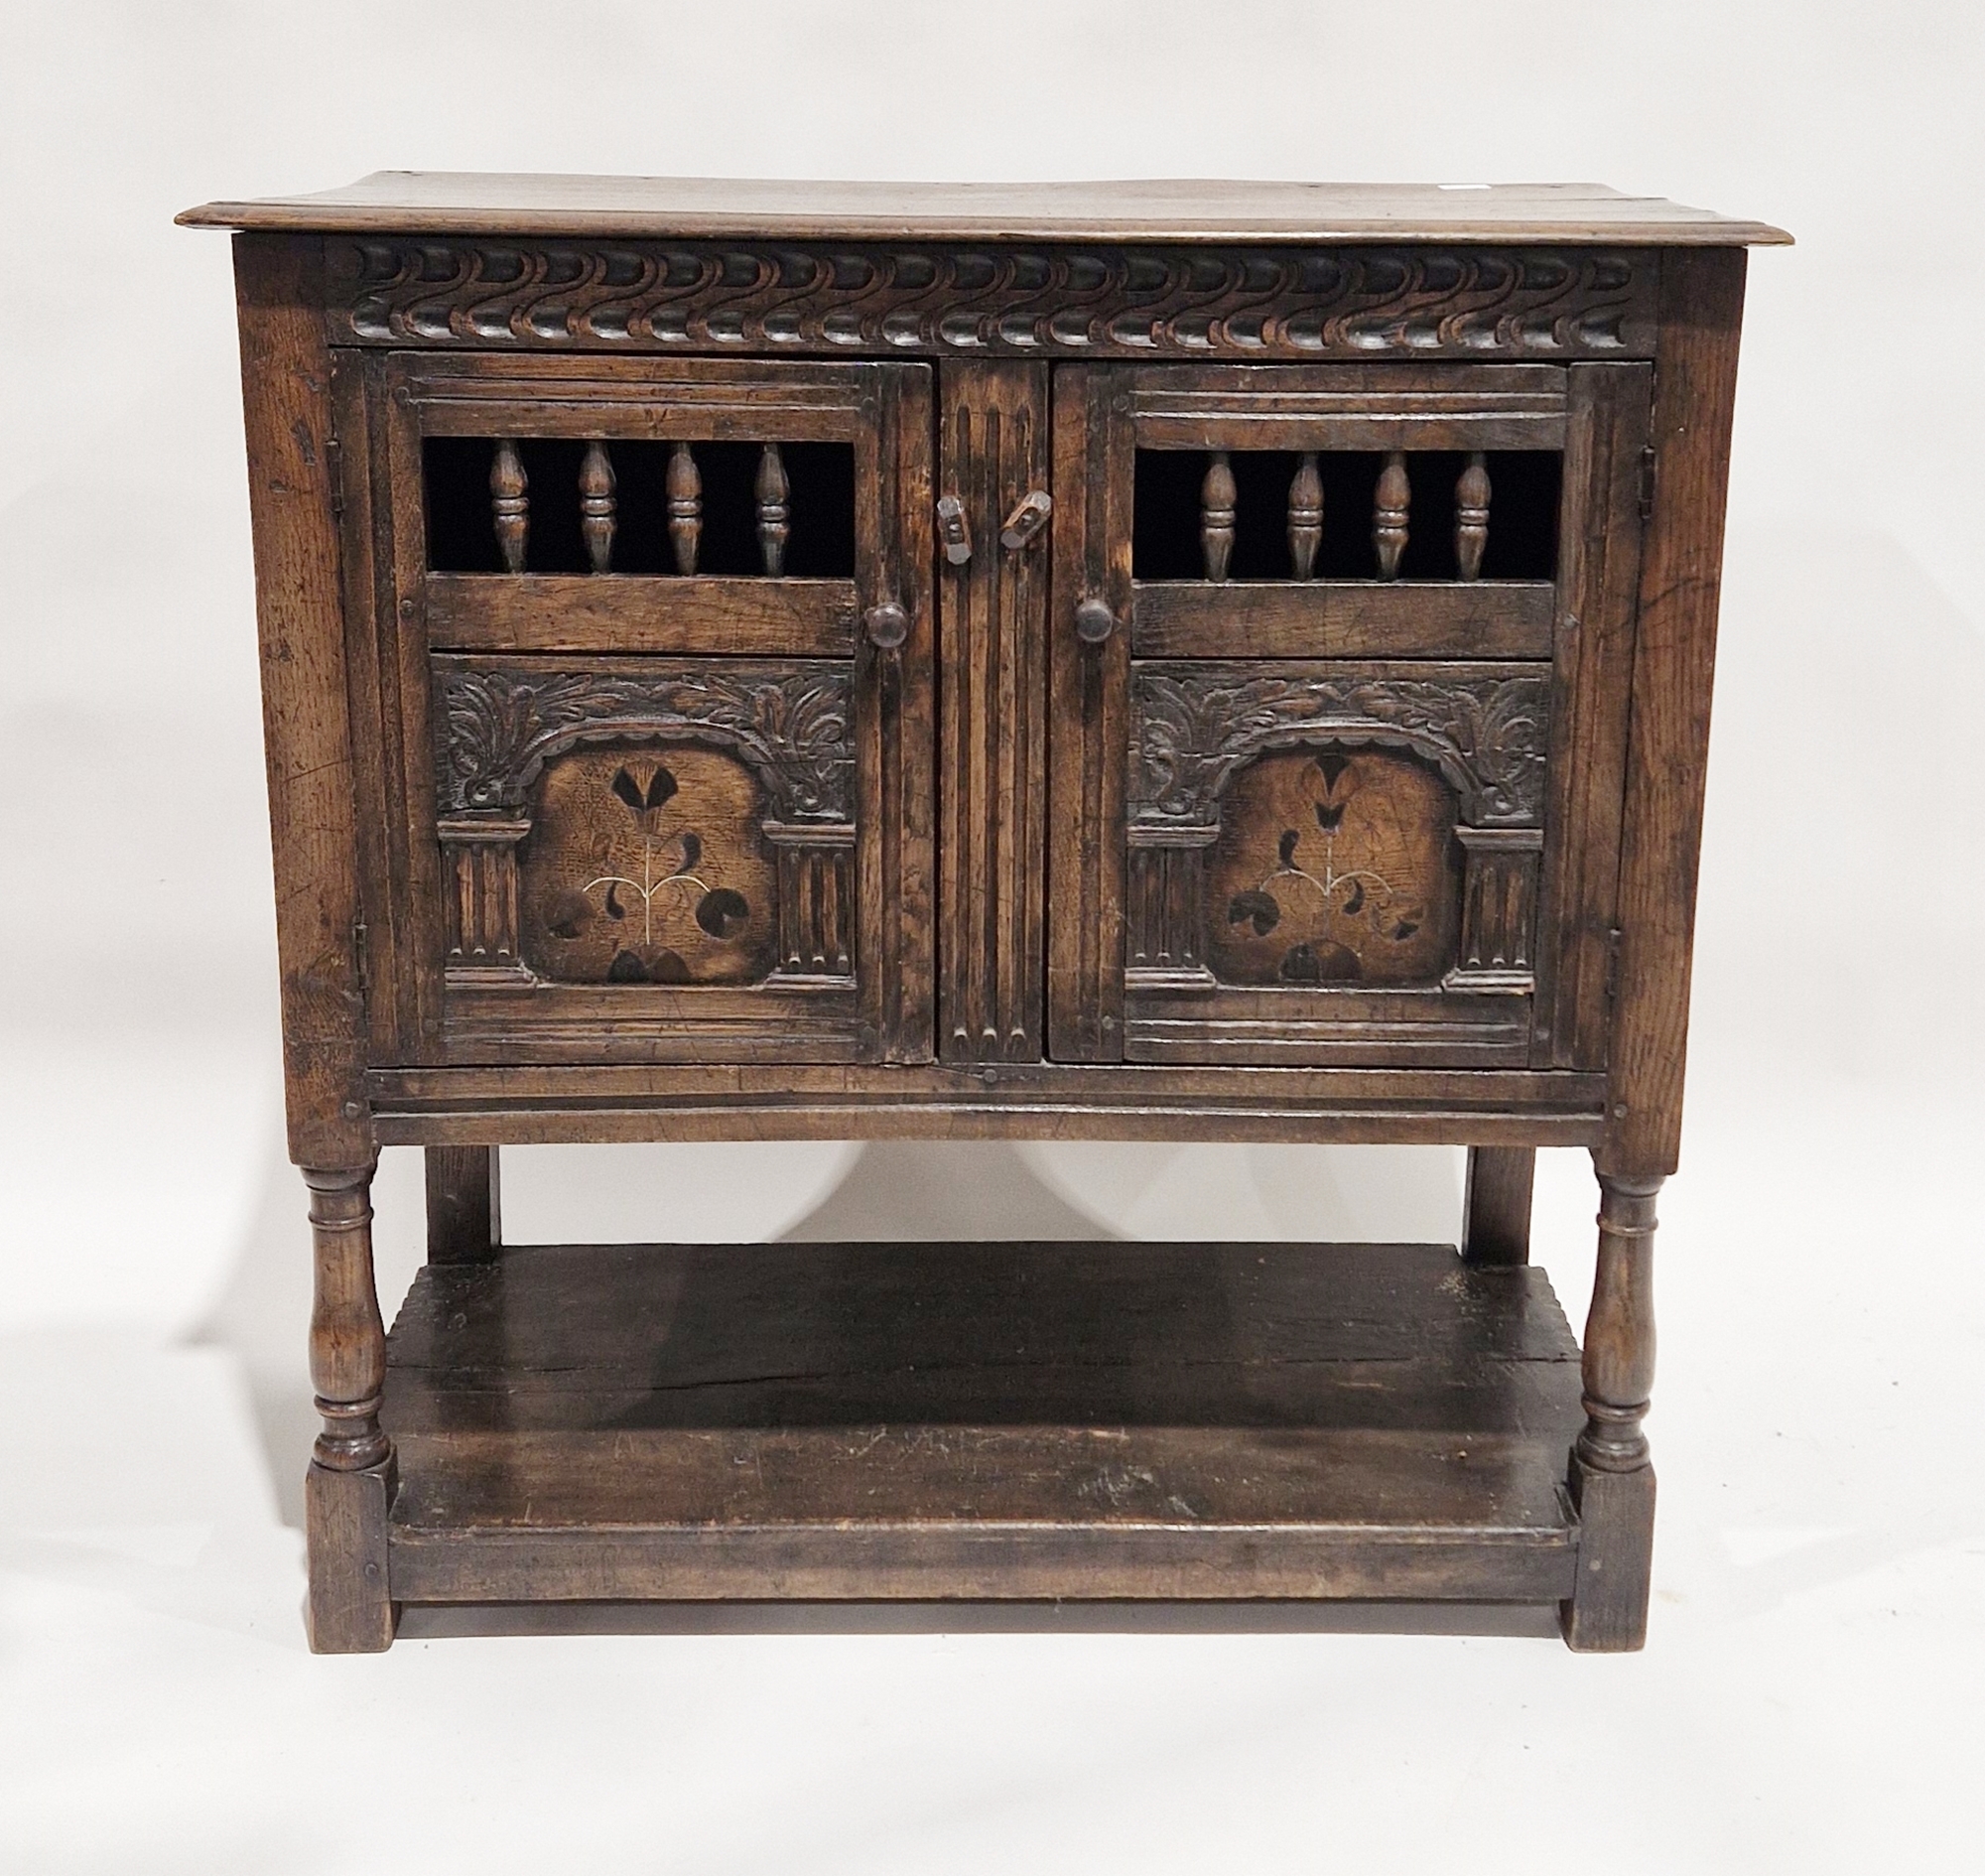 18th century oak dole cupboard, the two cupboard doors with turned spindle sections, carved and